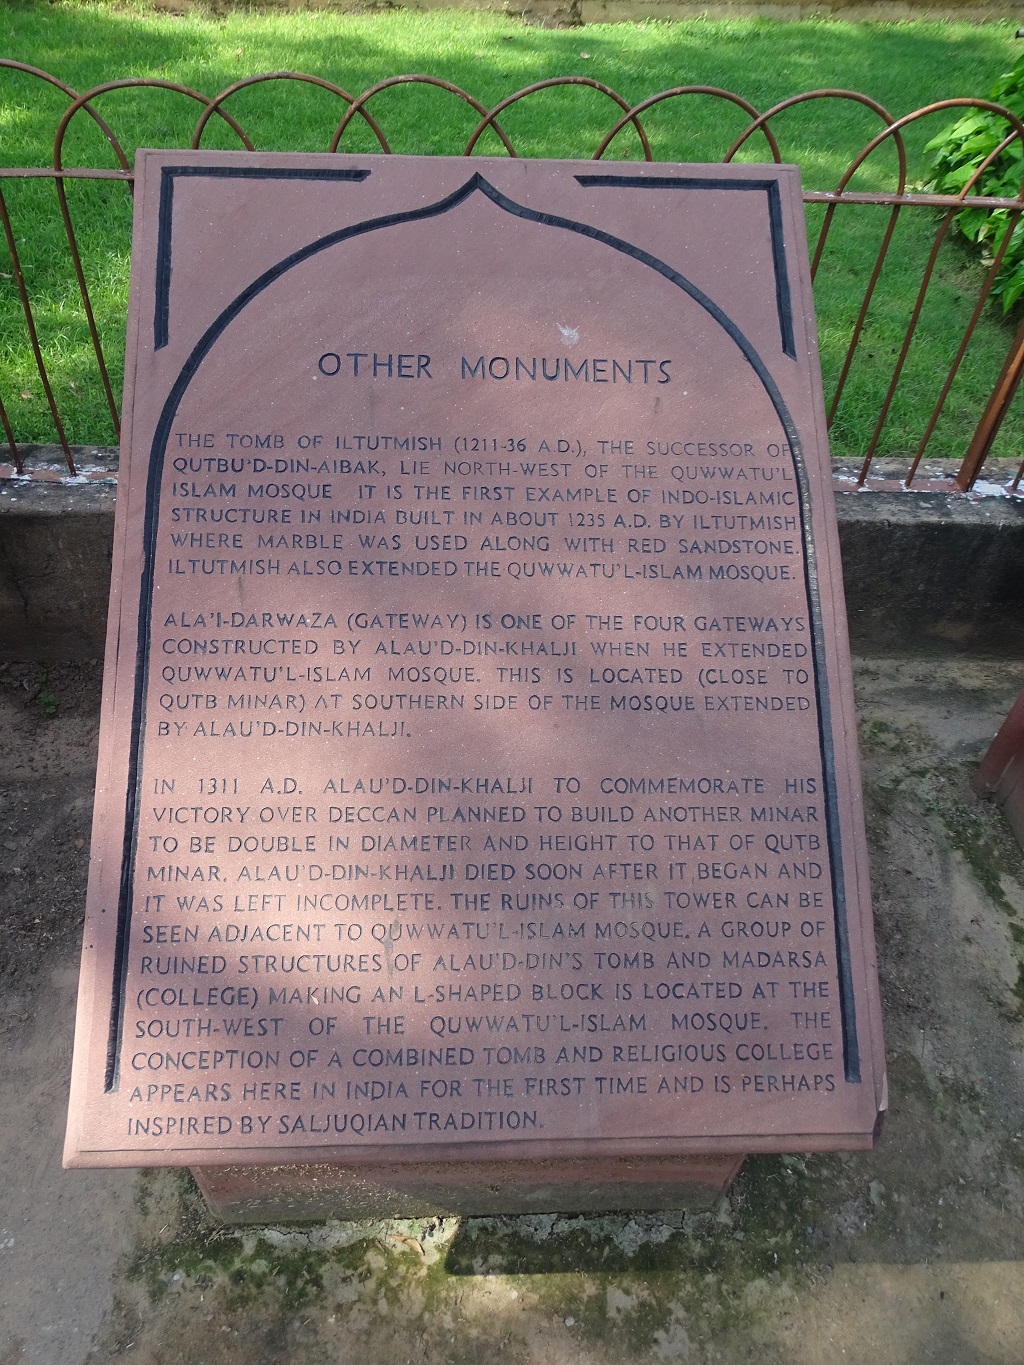 About: Other Monuments at Qutb Complex